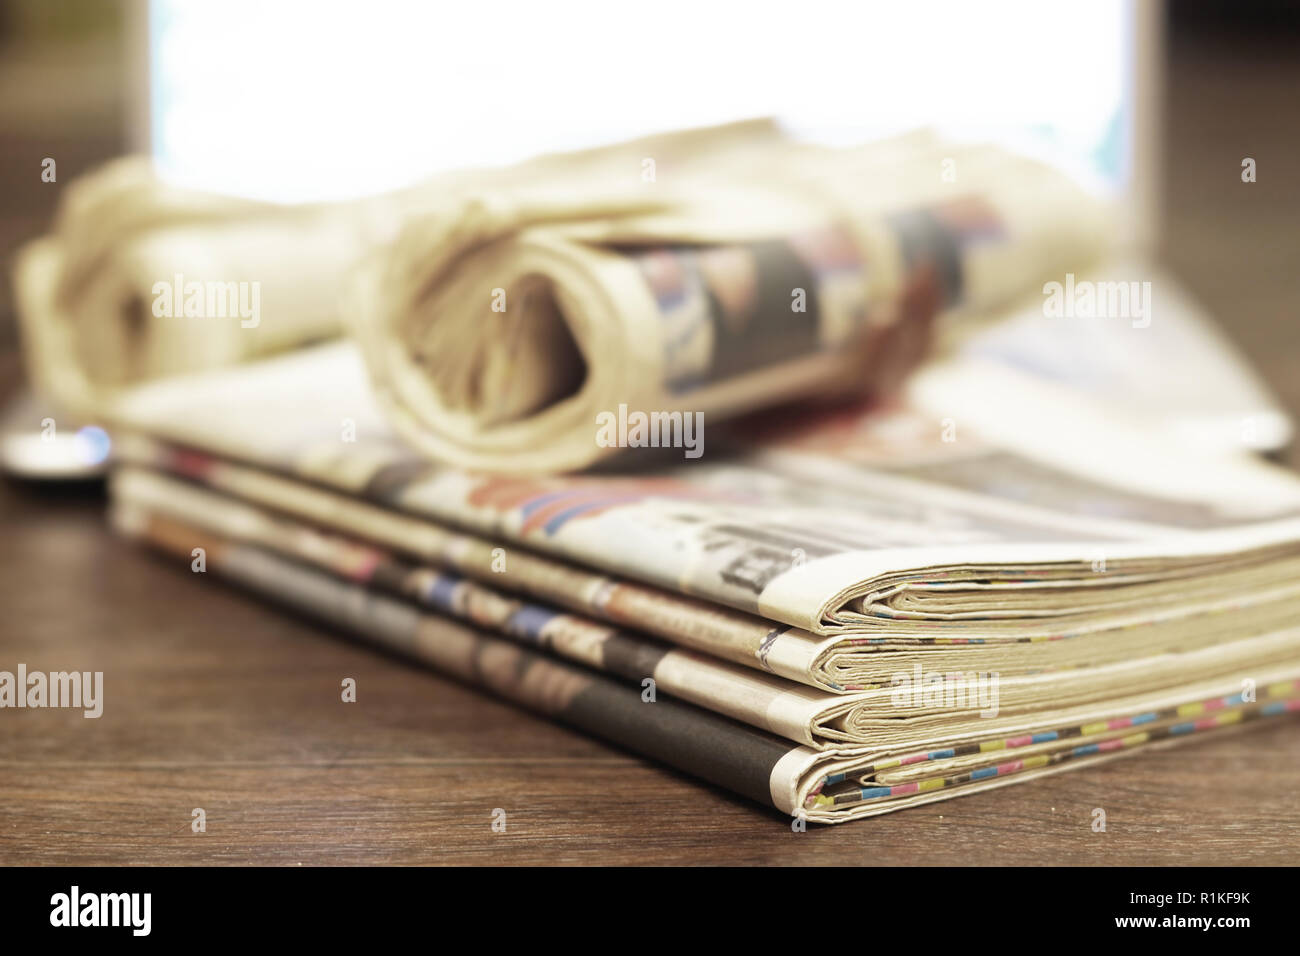 Pile of fresh morning newspapers on table at office. Latest financial and business news in daily paper. Pages with headlines, articles, photos, tex Stock Photo